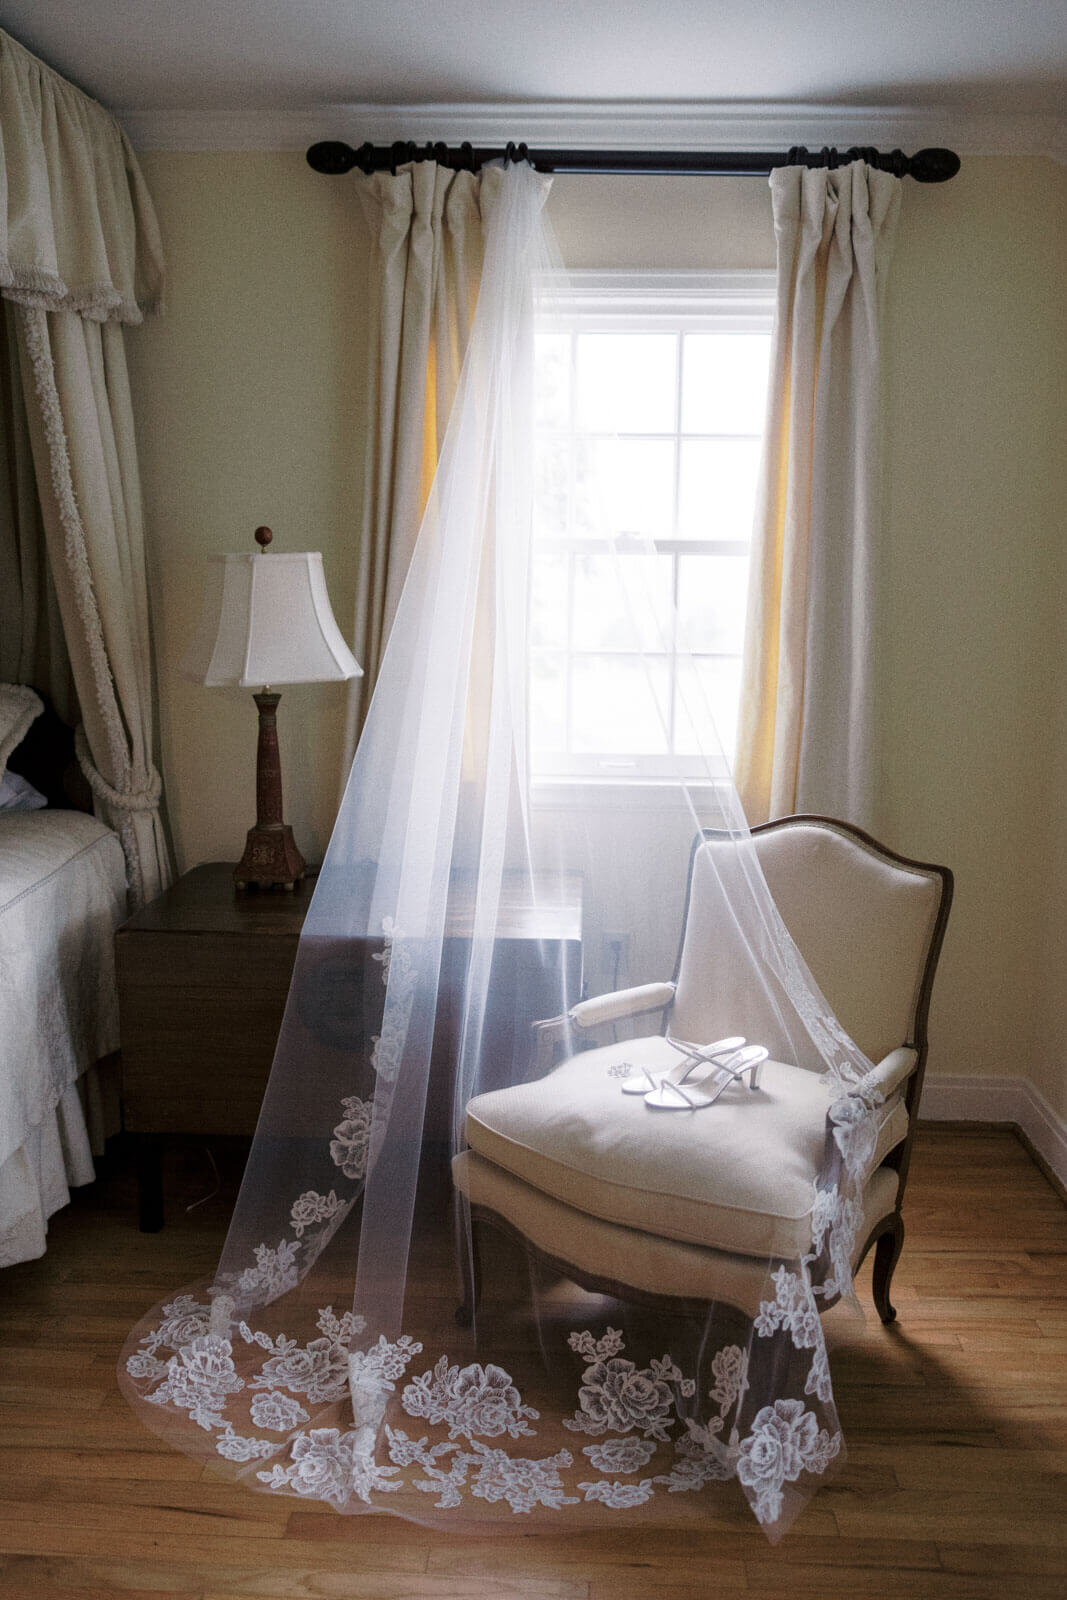 The bride's wedding footwear is on a couch, covered with her veil, which is hanging from the window, at The Lion Rock Farm, CT.